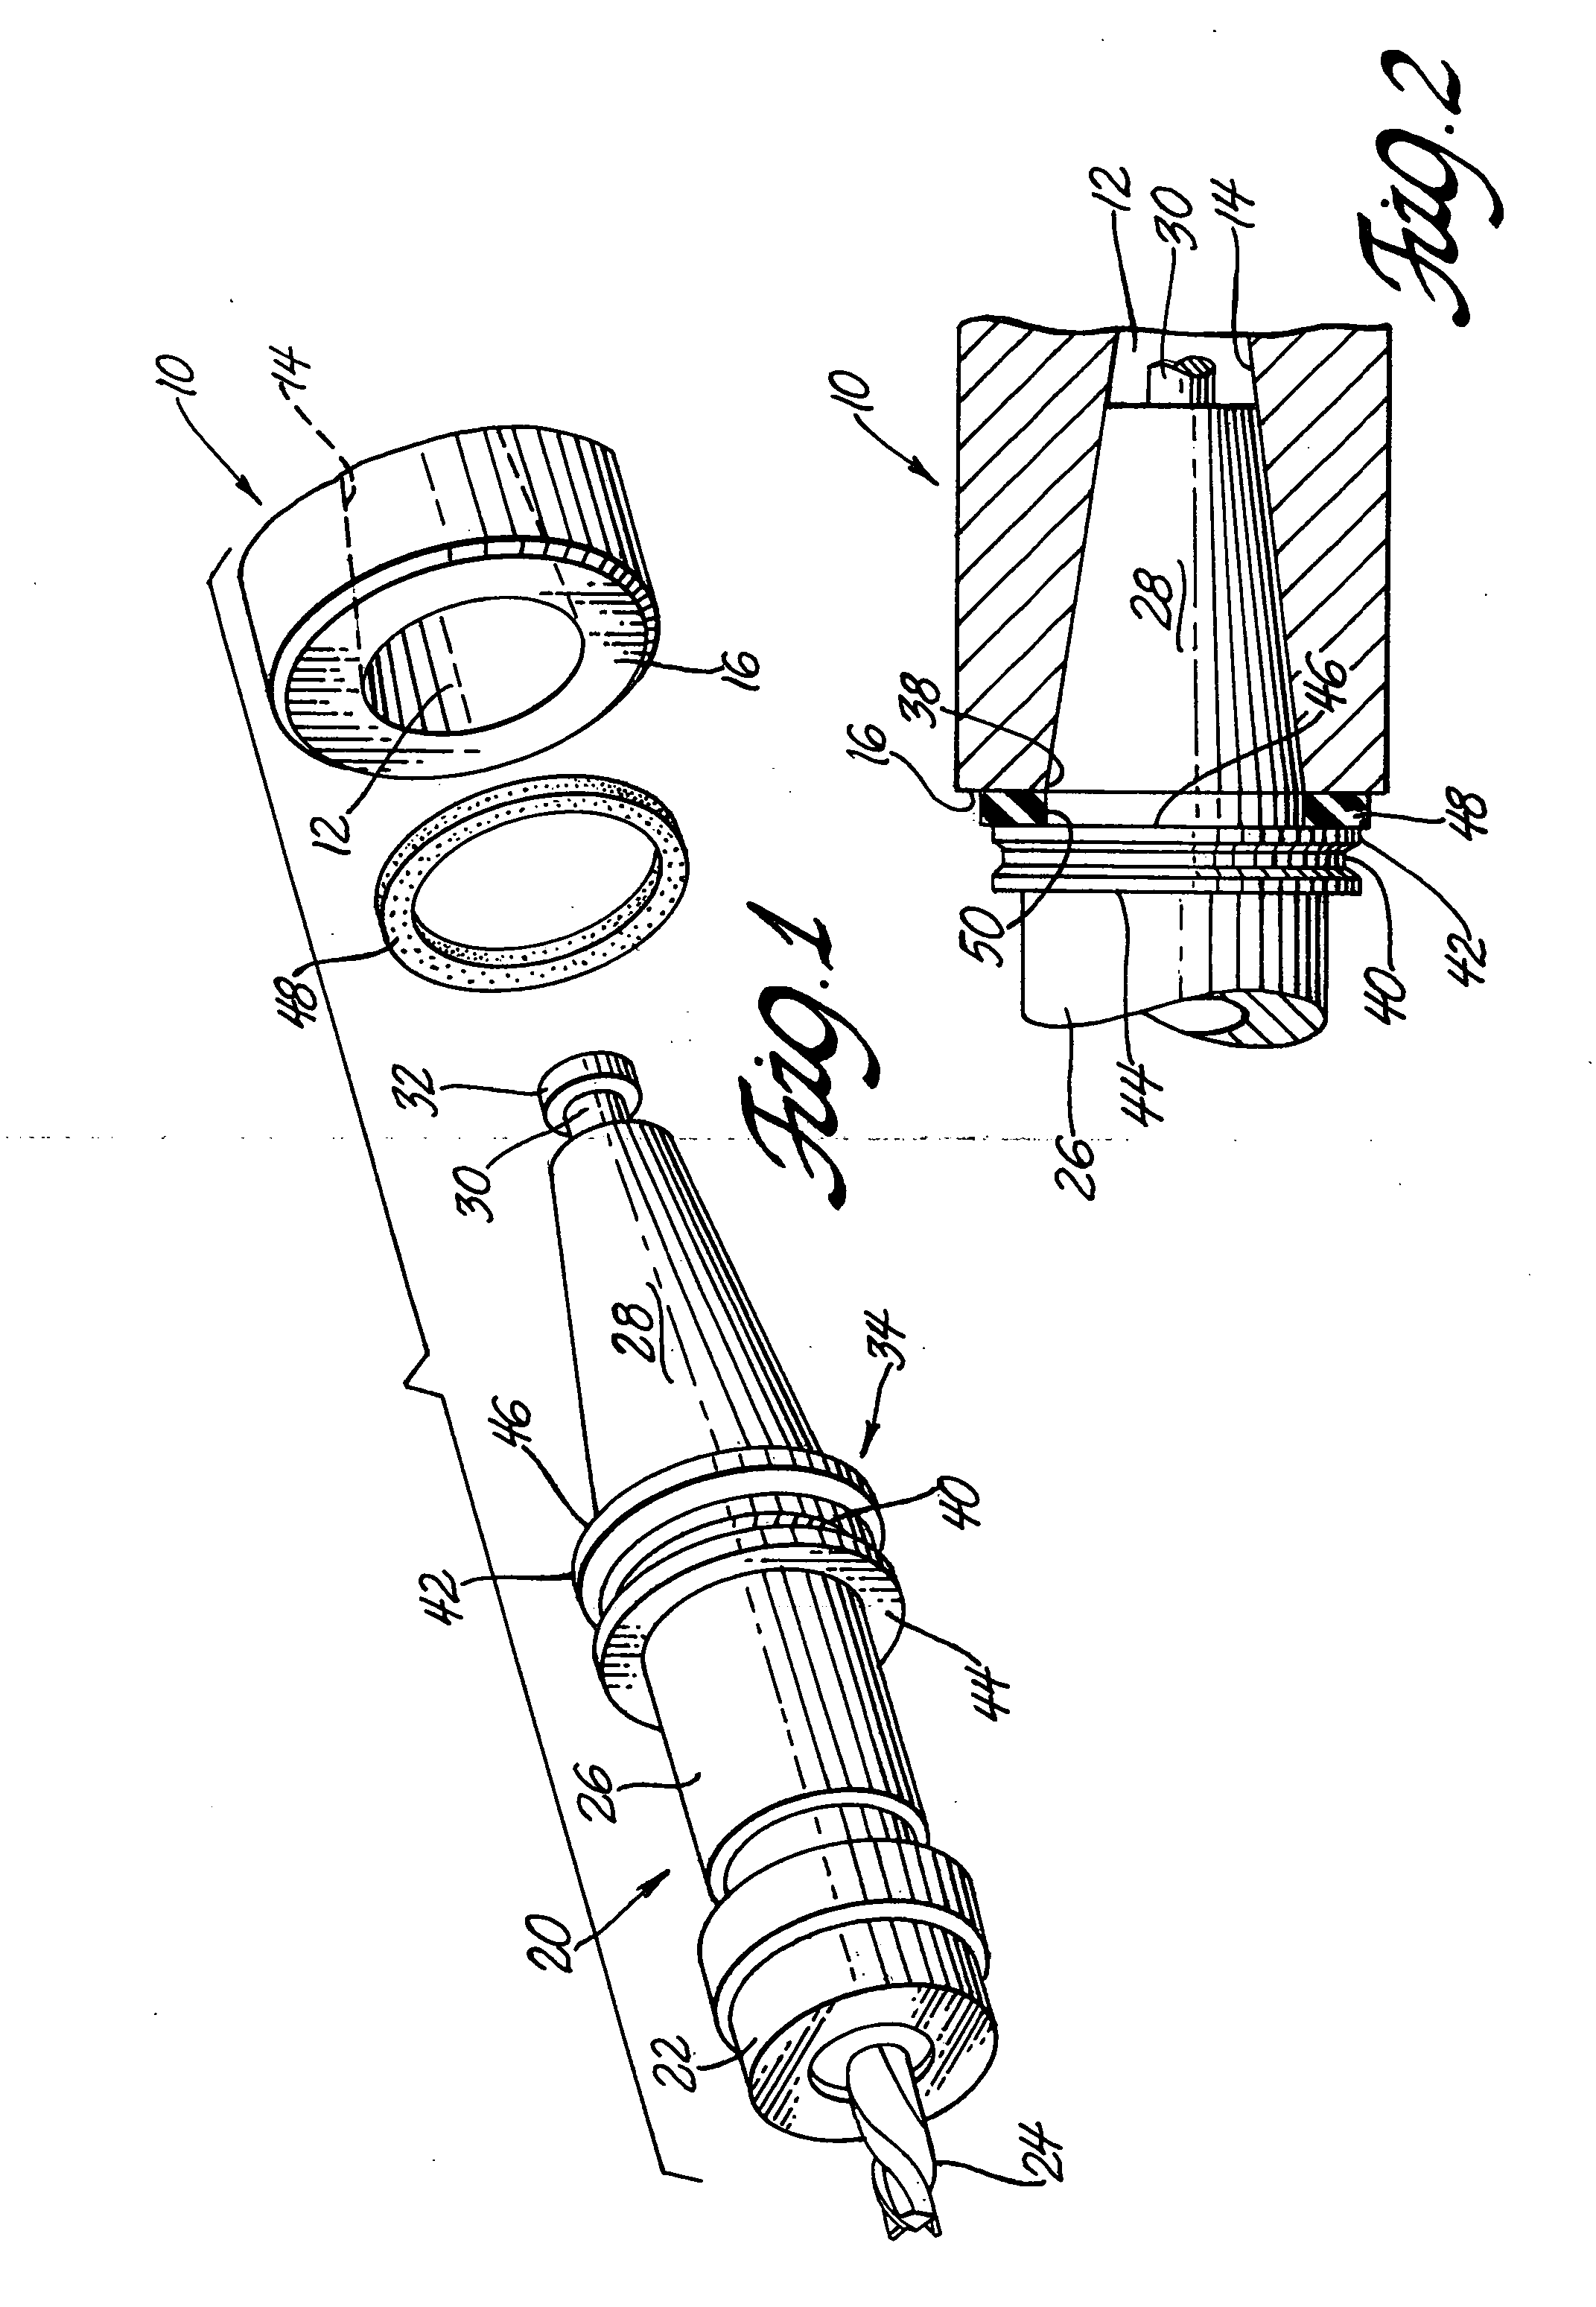 Spacer adapter for toolholders